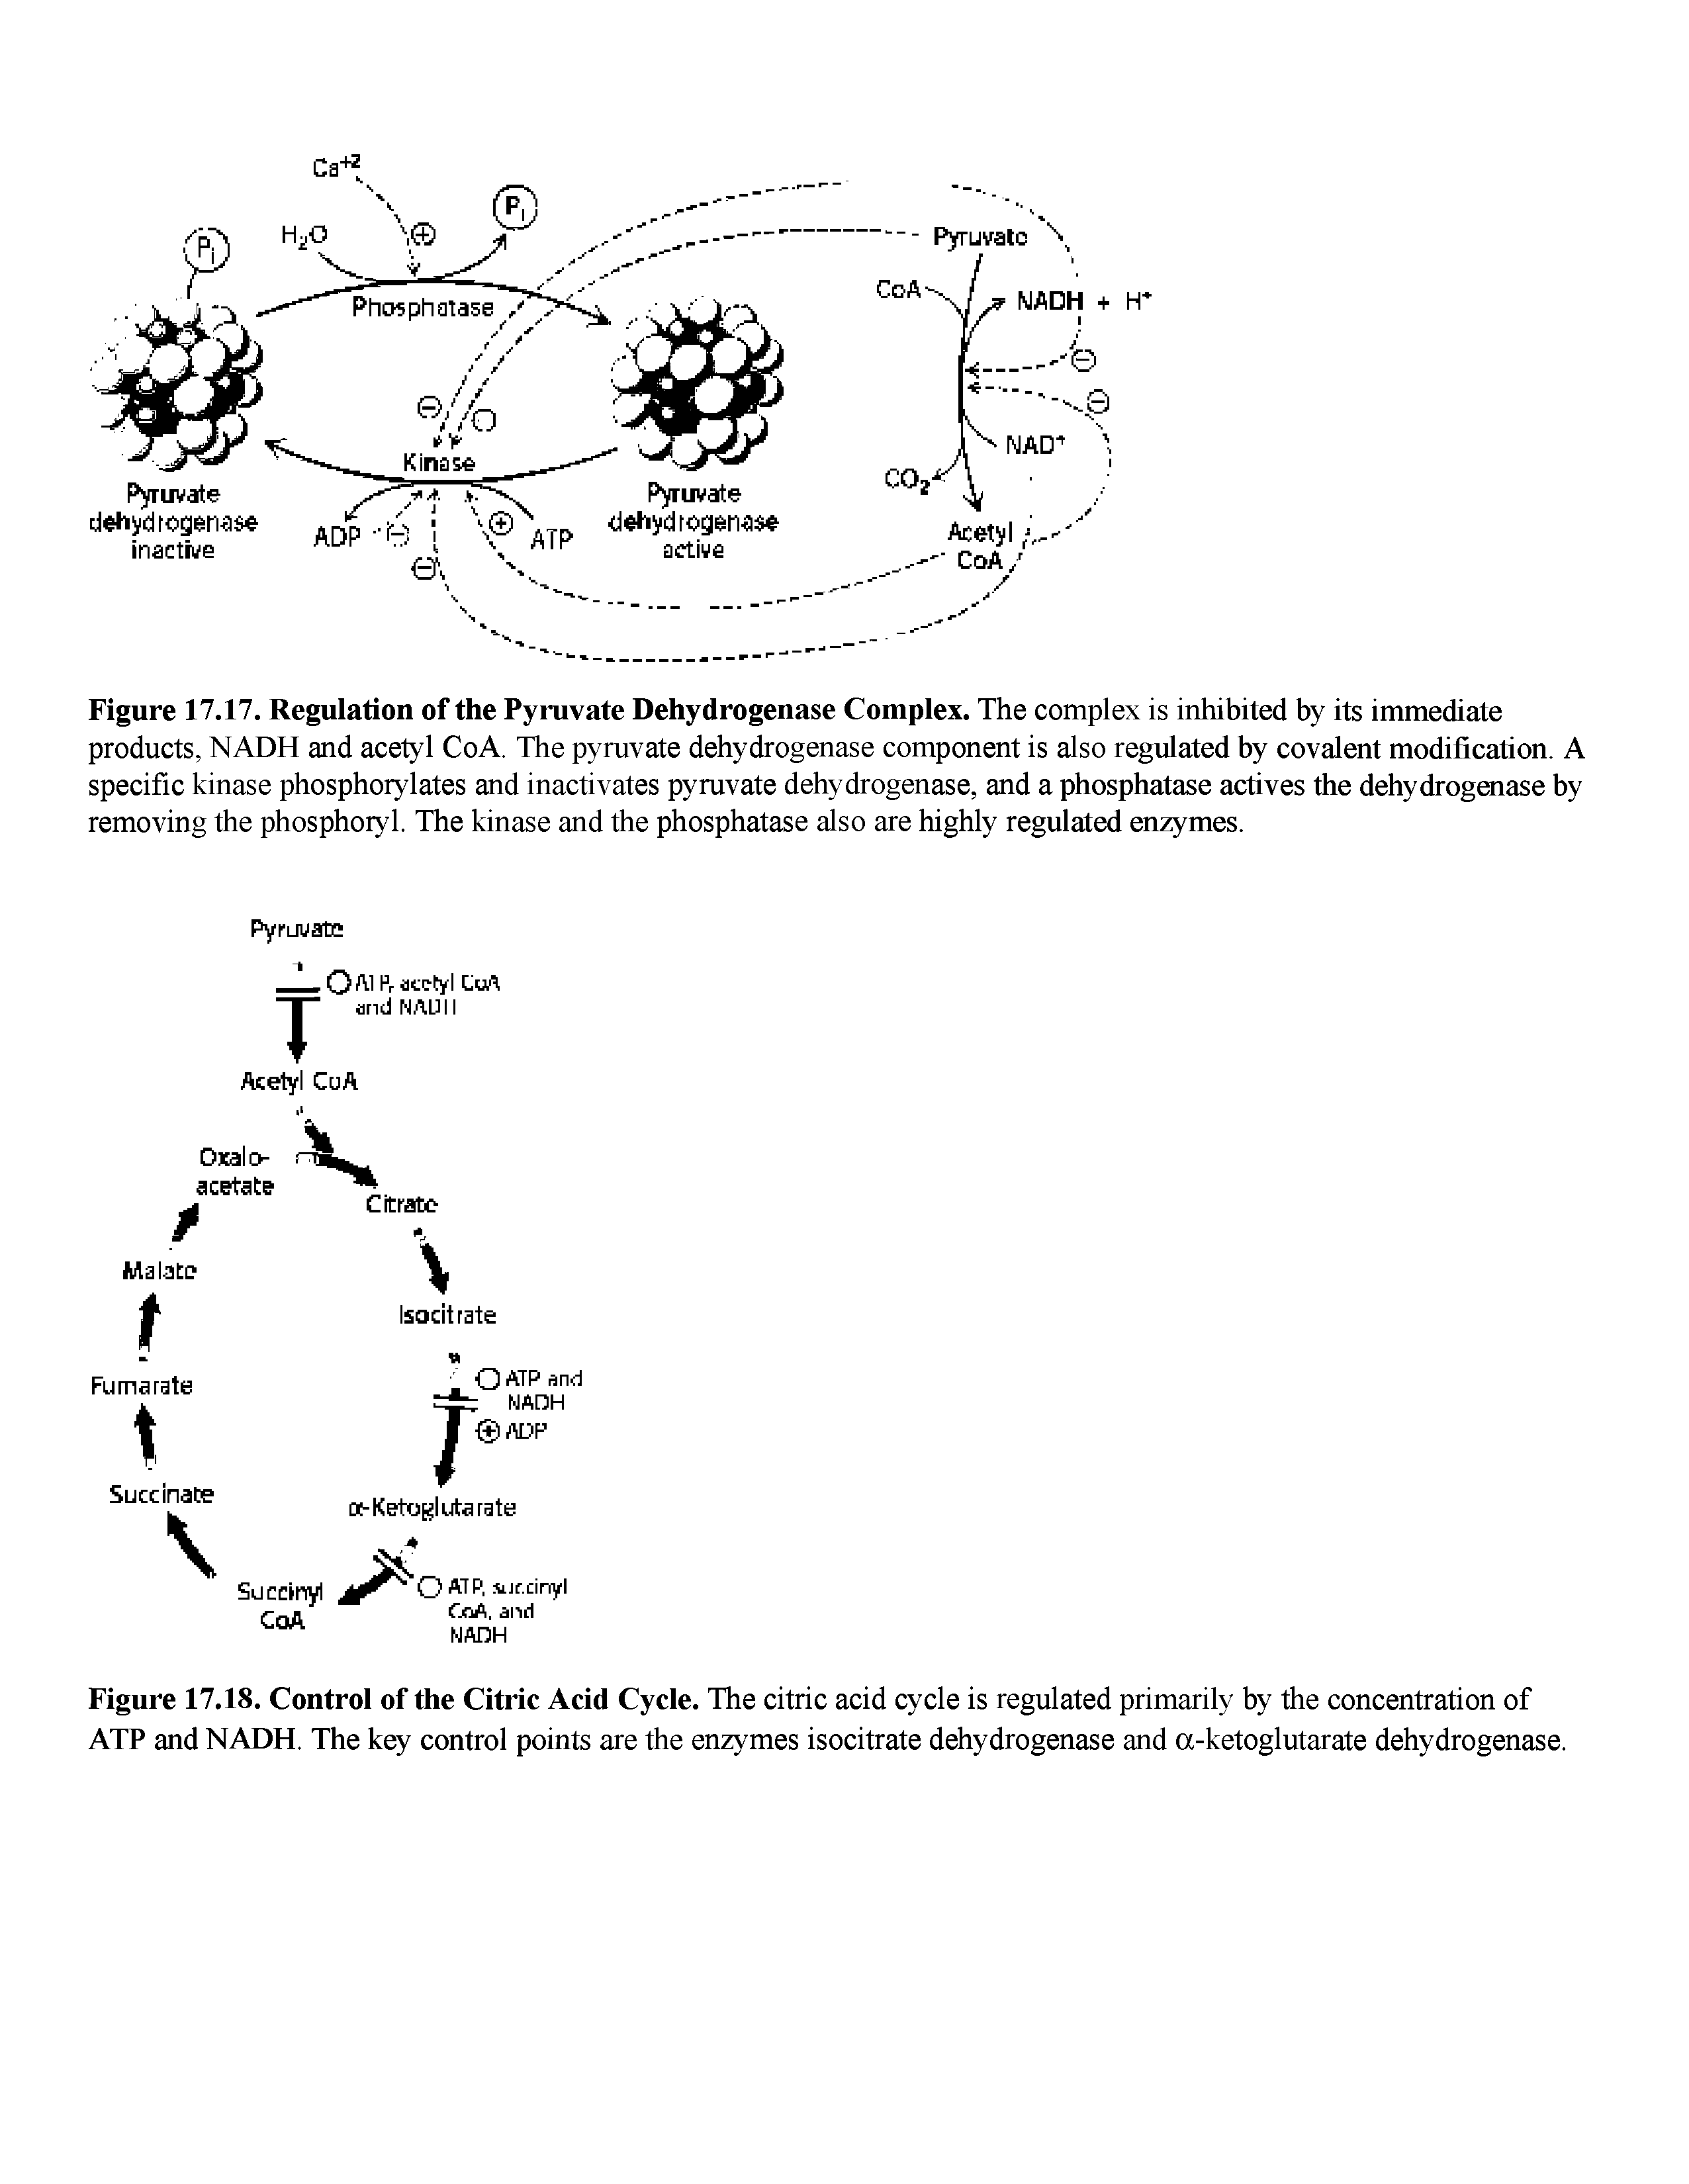 Figure 17.18. Control of the Citric Acid Cycle. The citric acid cycle is regulated primarily by the concentration of ATP and NADH. The key control points are the enzymes isocitrate dehydrogenase and a-ketoglutarate dehydrogenase.